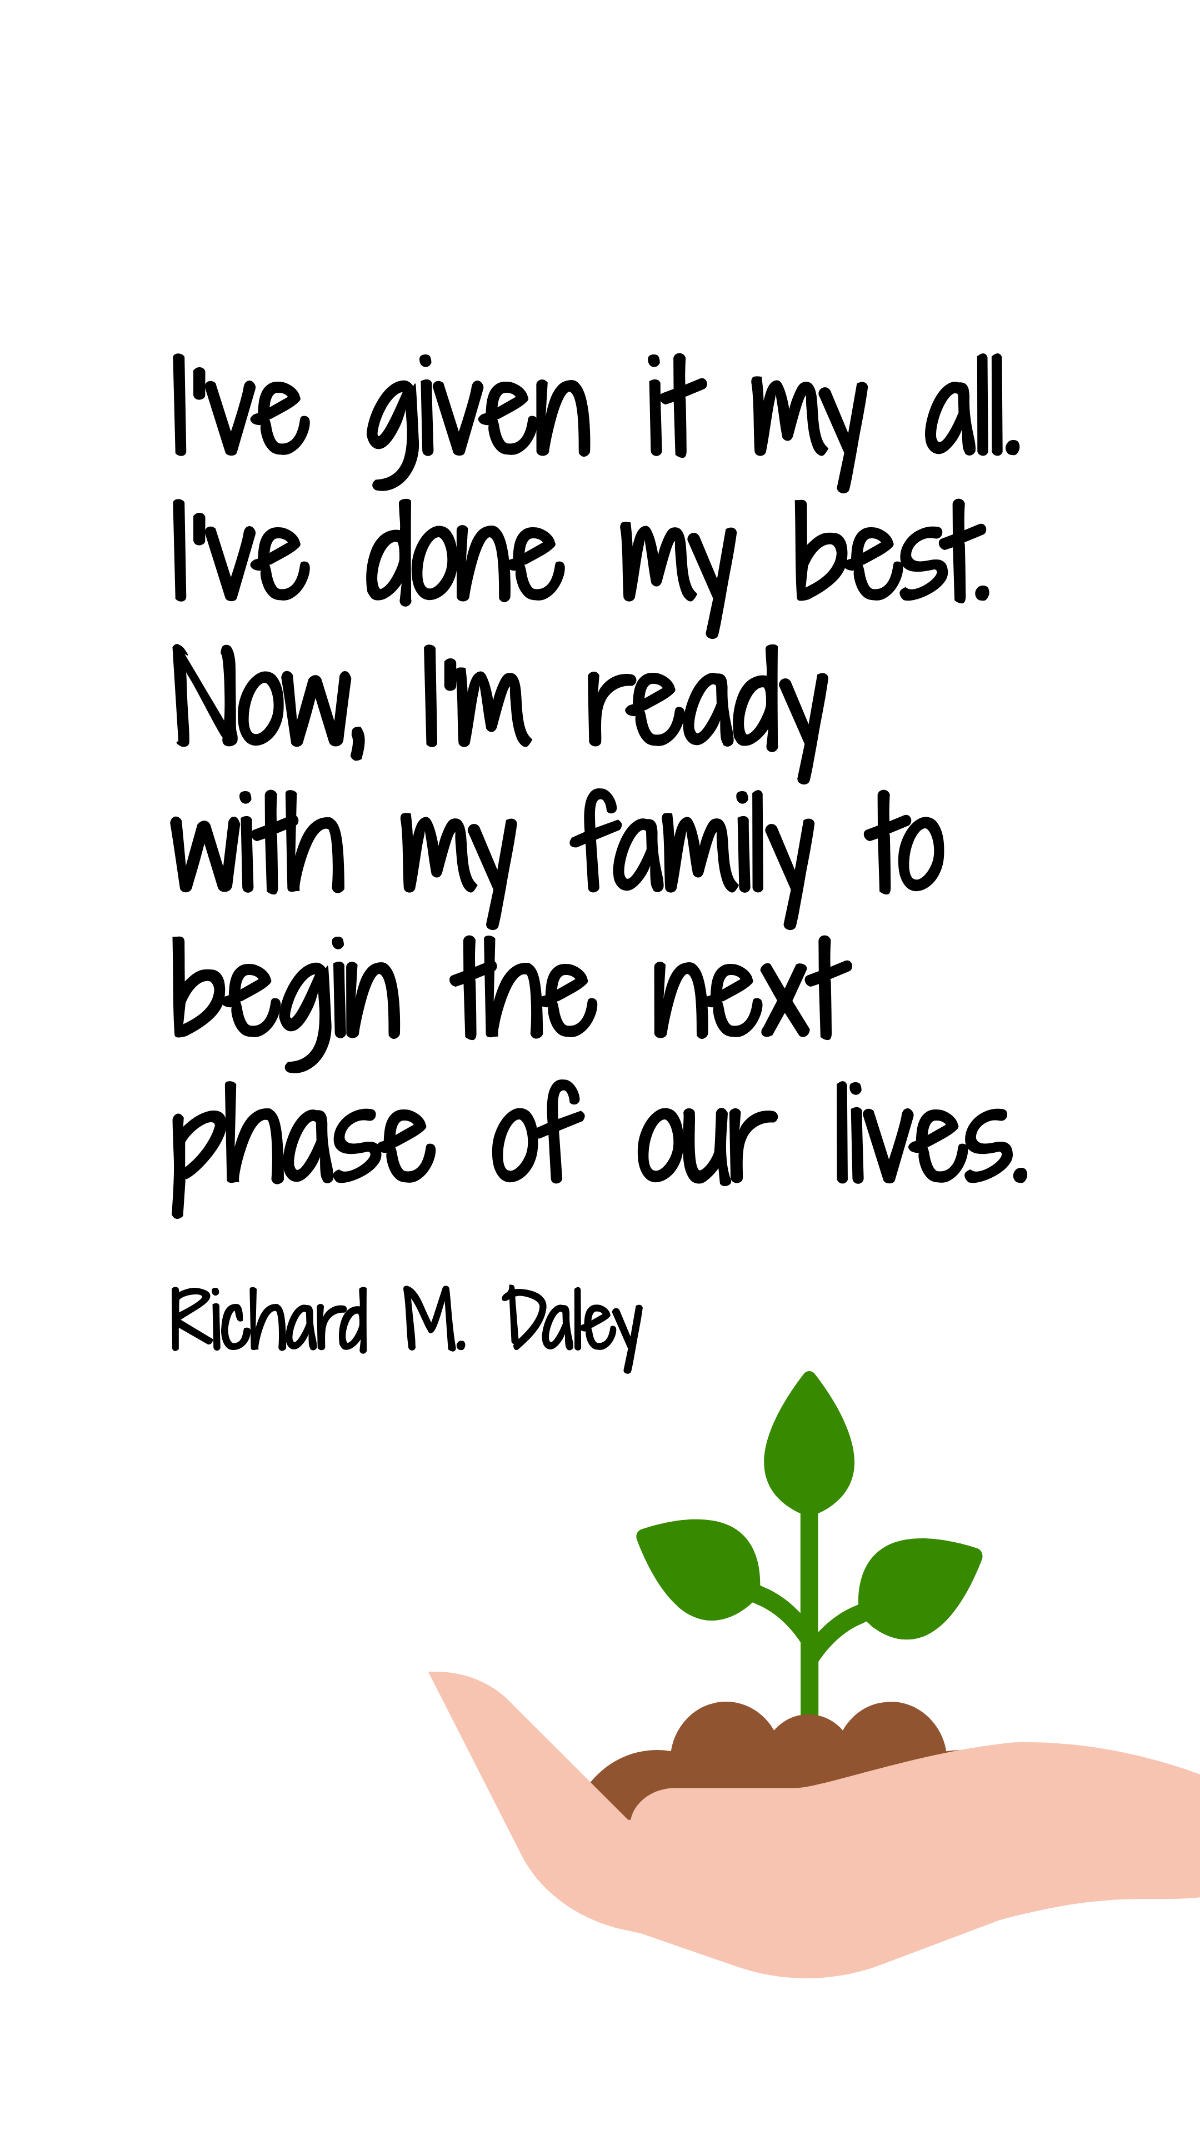 Free Richard M. Daley - I've given it my all. I've done my best. Now, I'm ready with my family to begin the next phase of our lives. Template